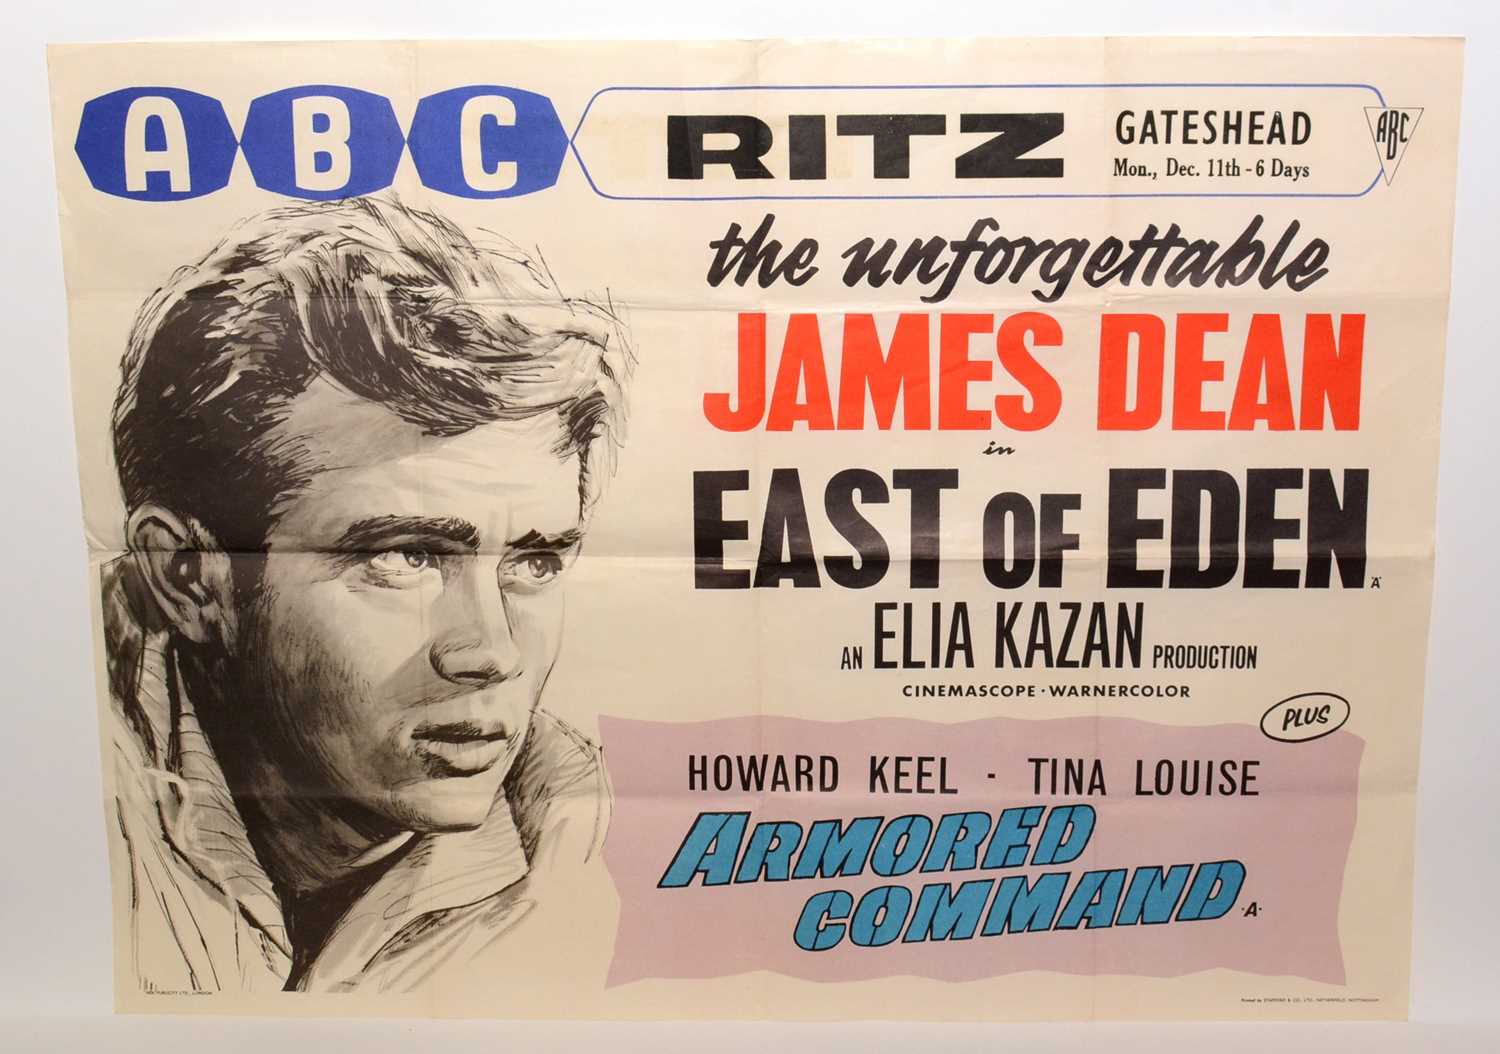 Lot 1273 - Theatre re-release quad movie poster for "East of Eden"